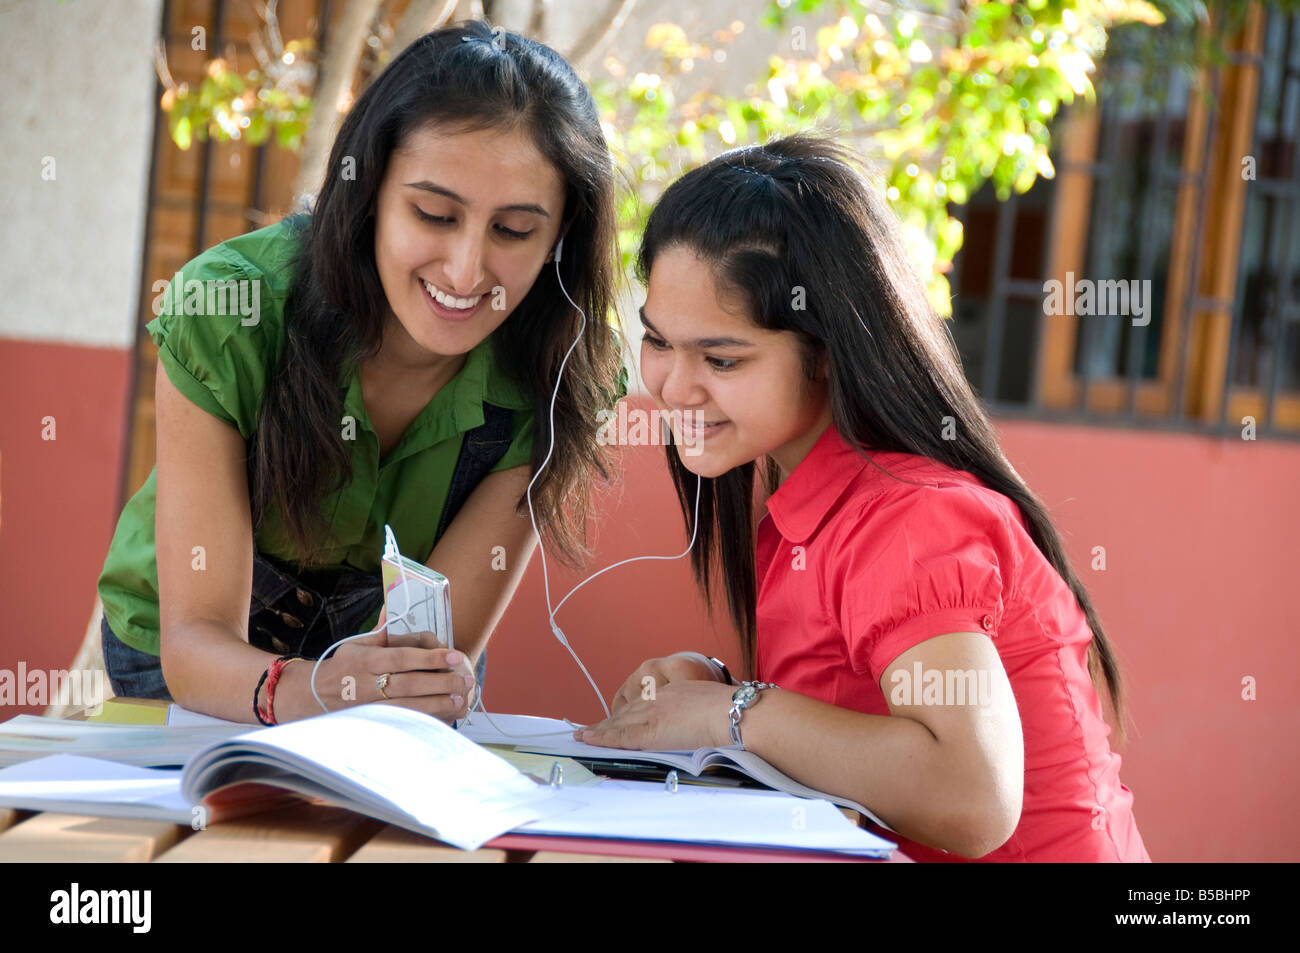 School teenage girl asian students 15-17 years sharing earphones with their Mp4 iPod player outside in sunny school playground campus Stock Photo